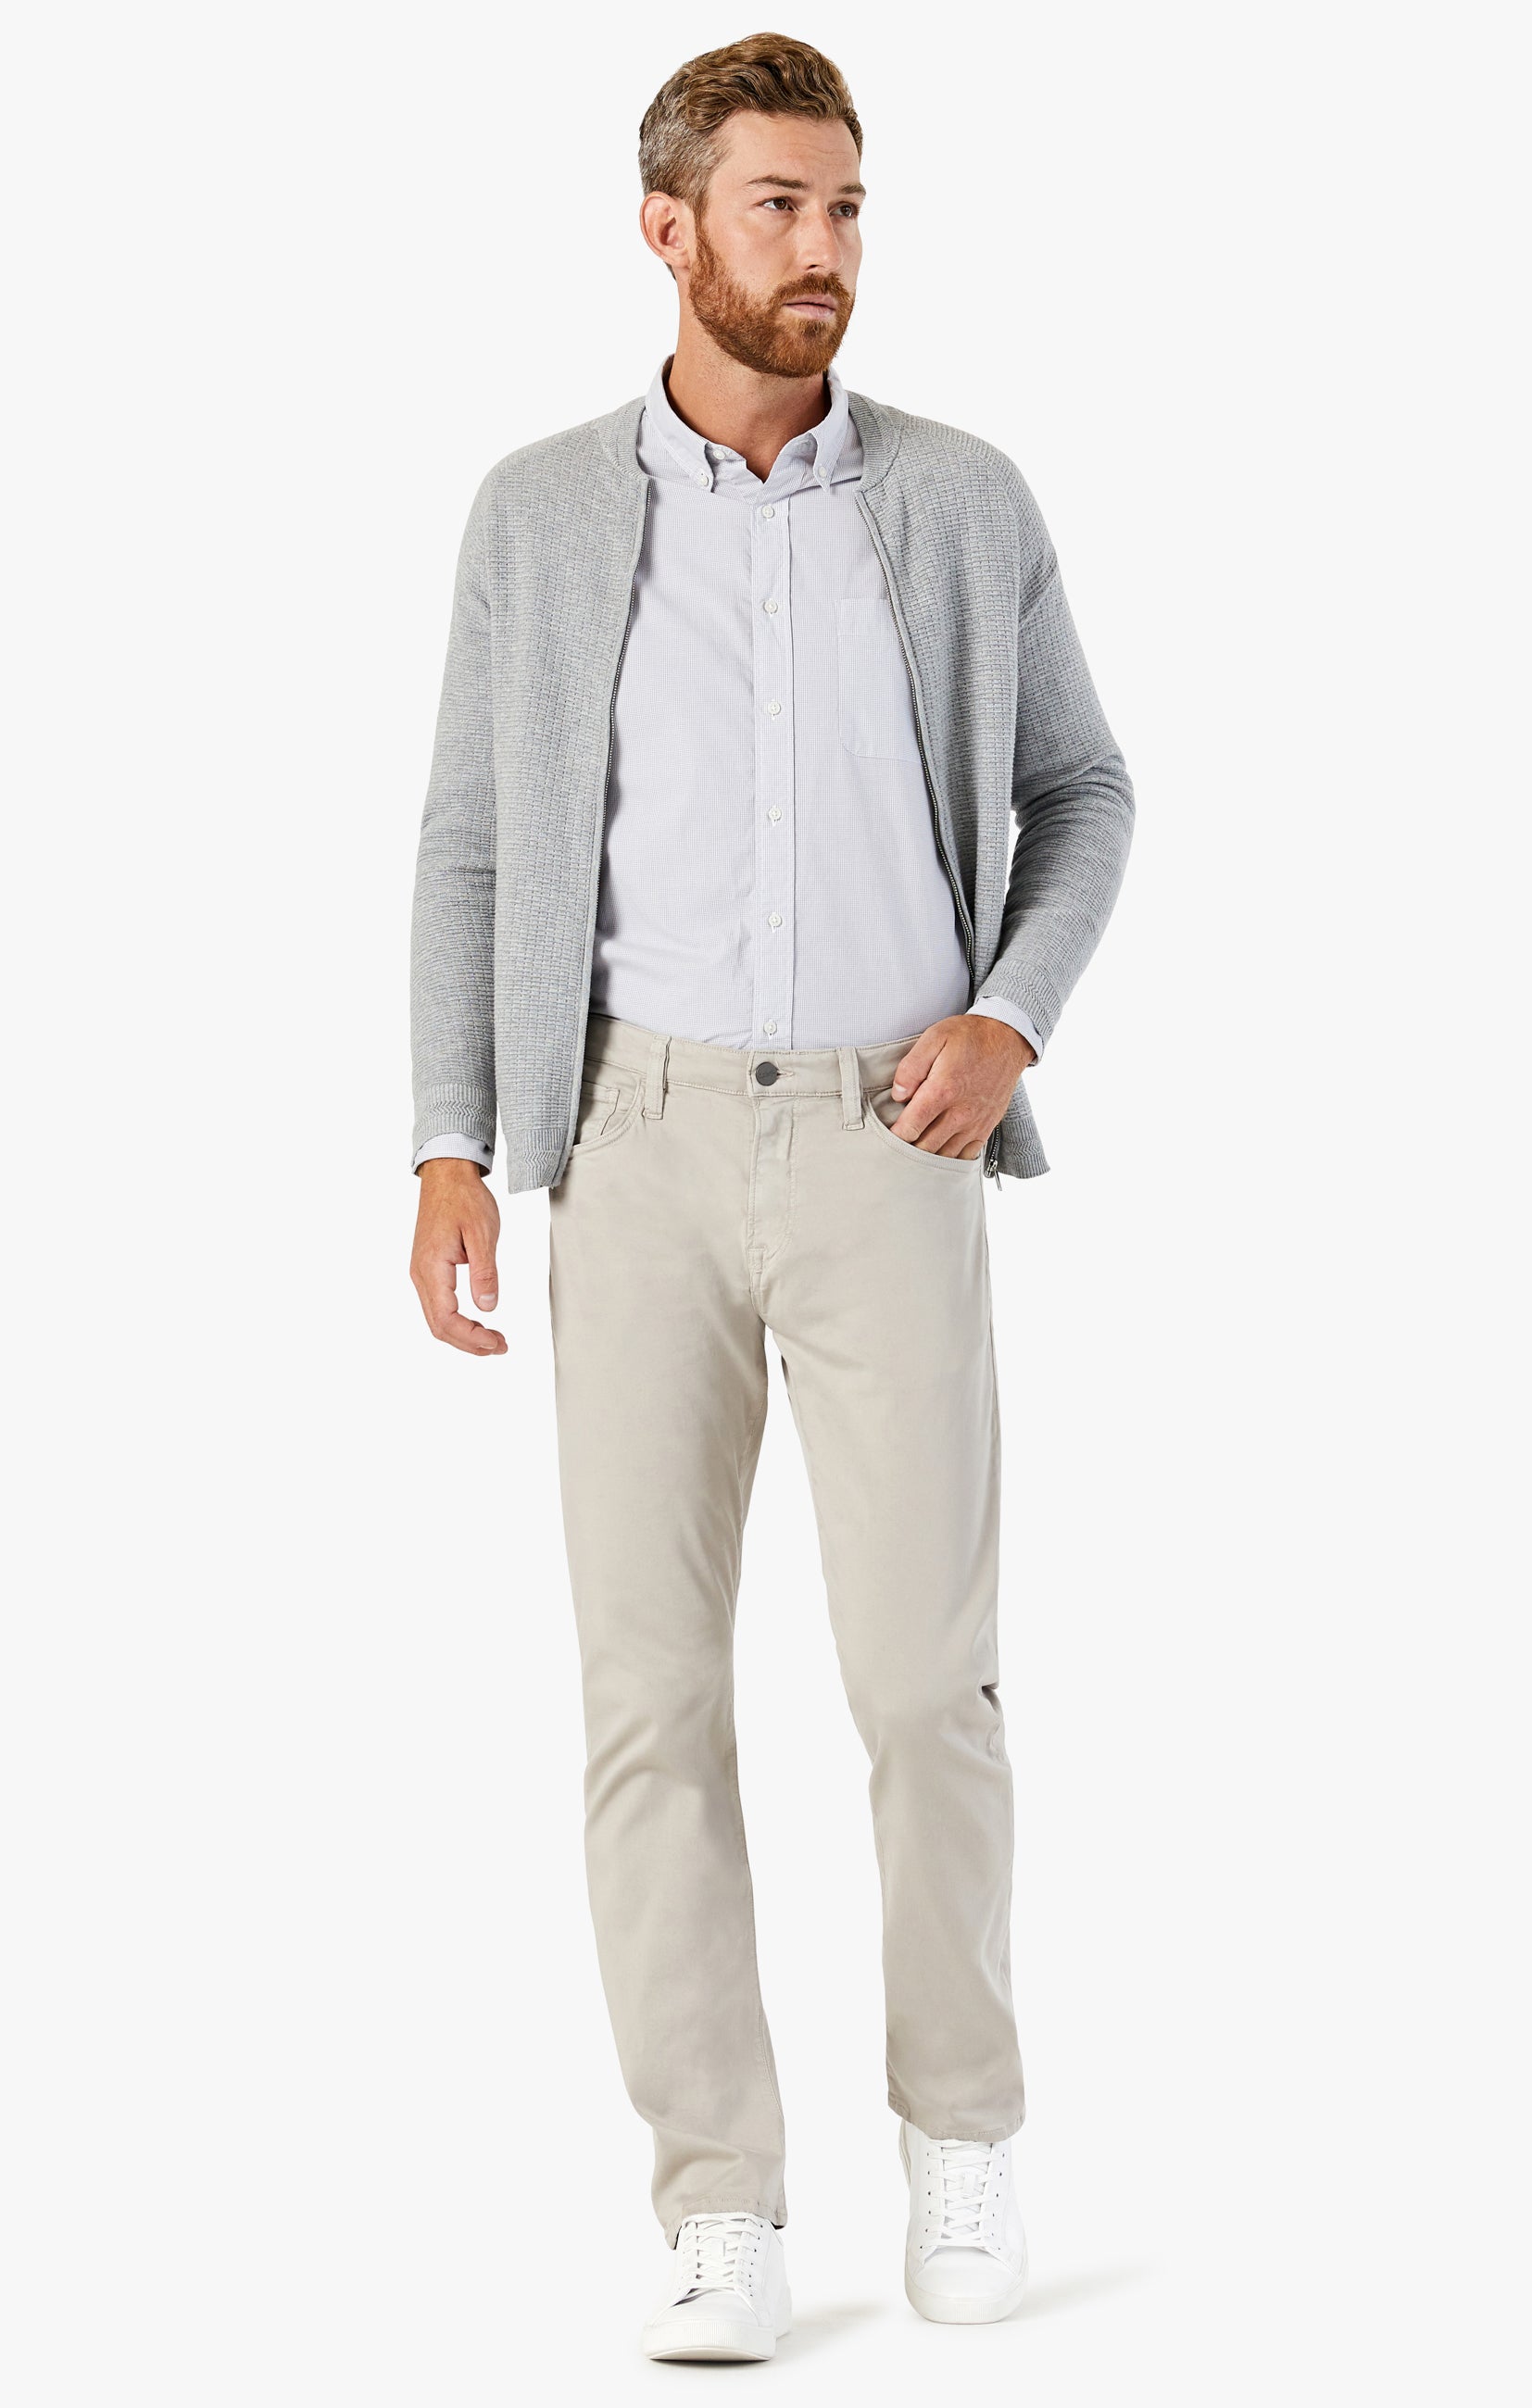 Courage Straight Leg Pants In Dawn Twill Image 2